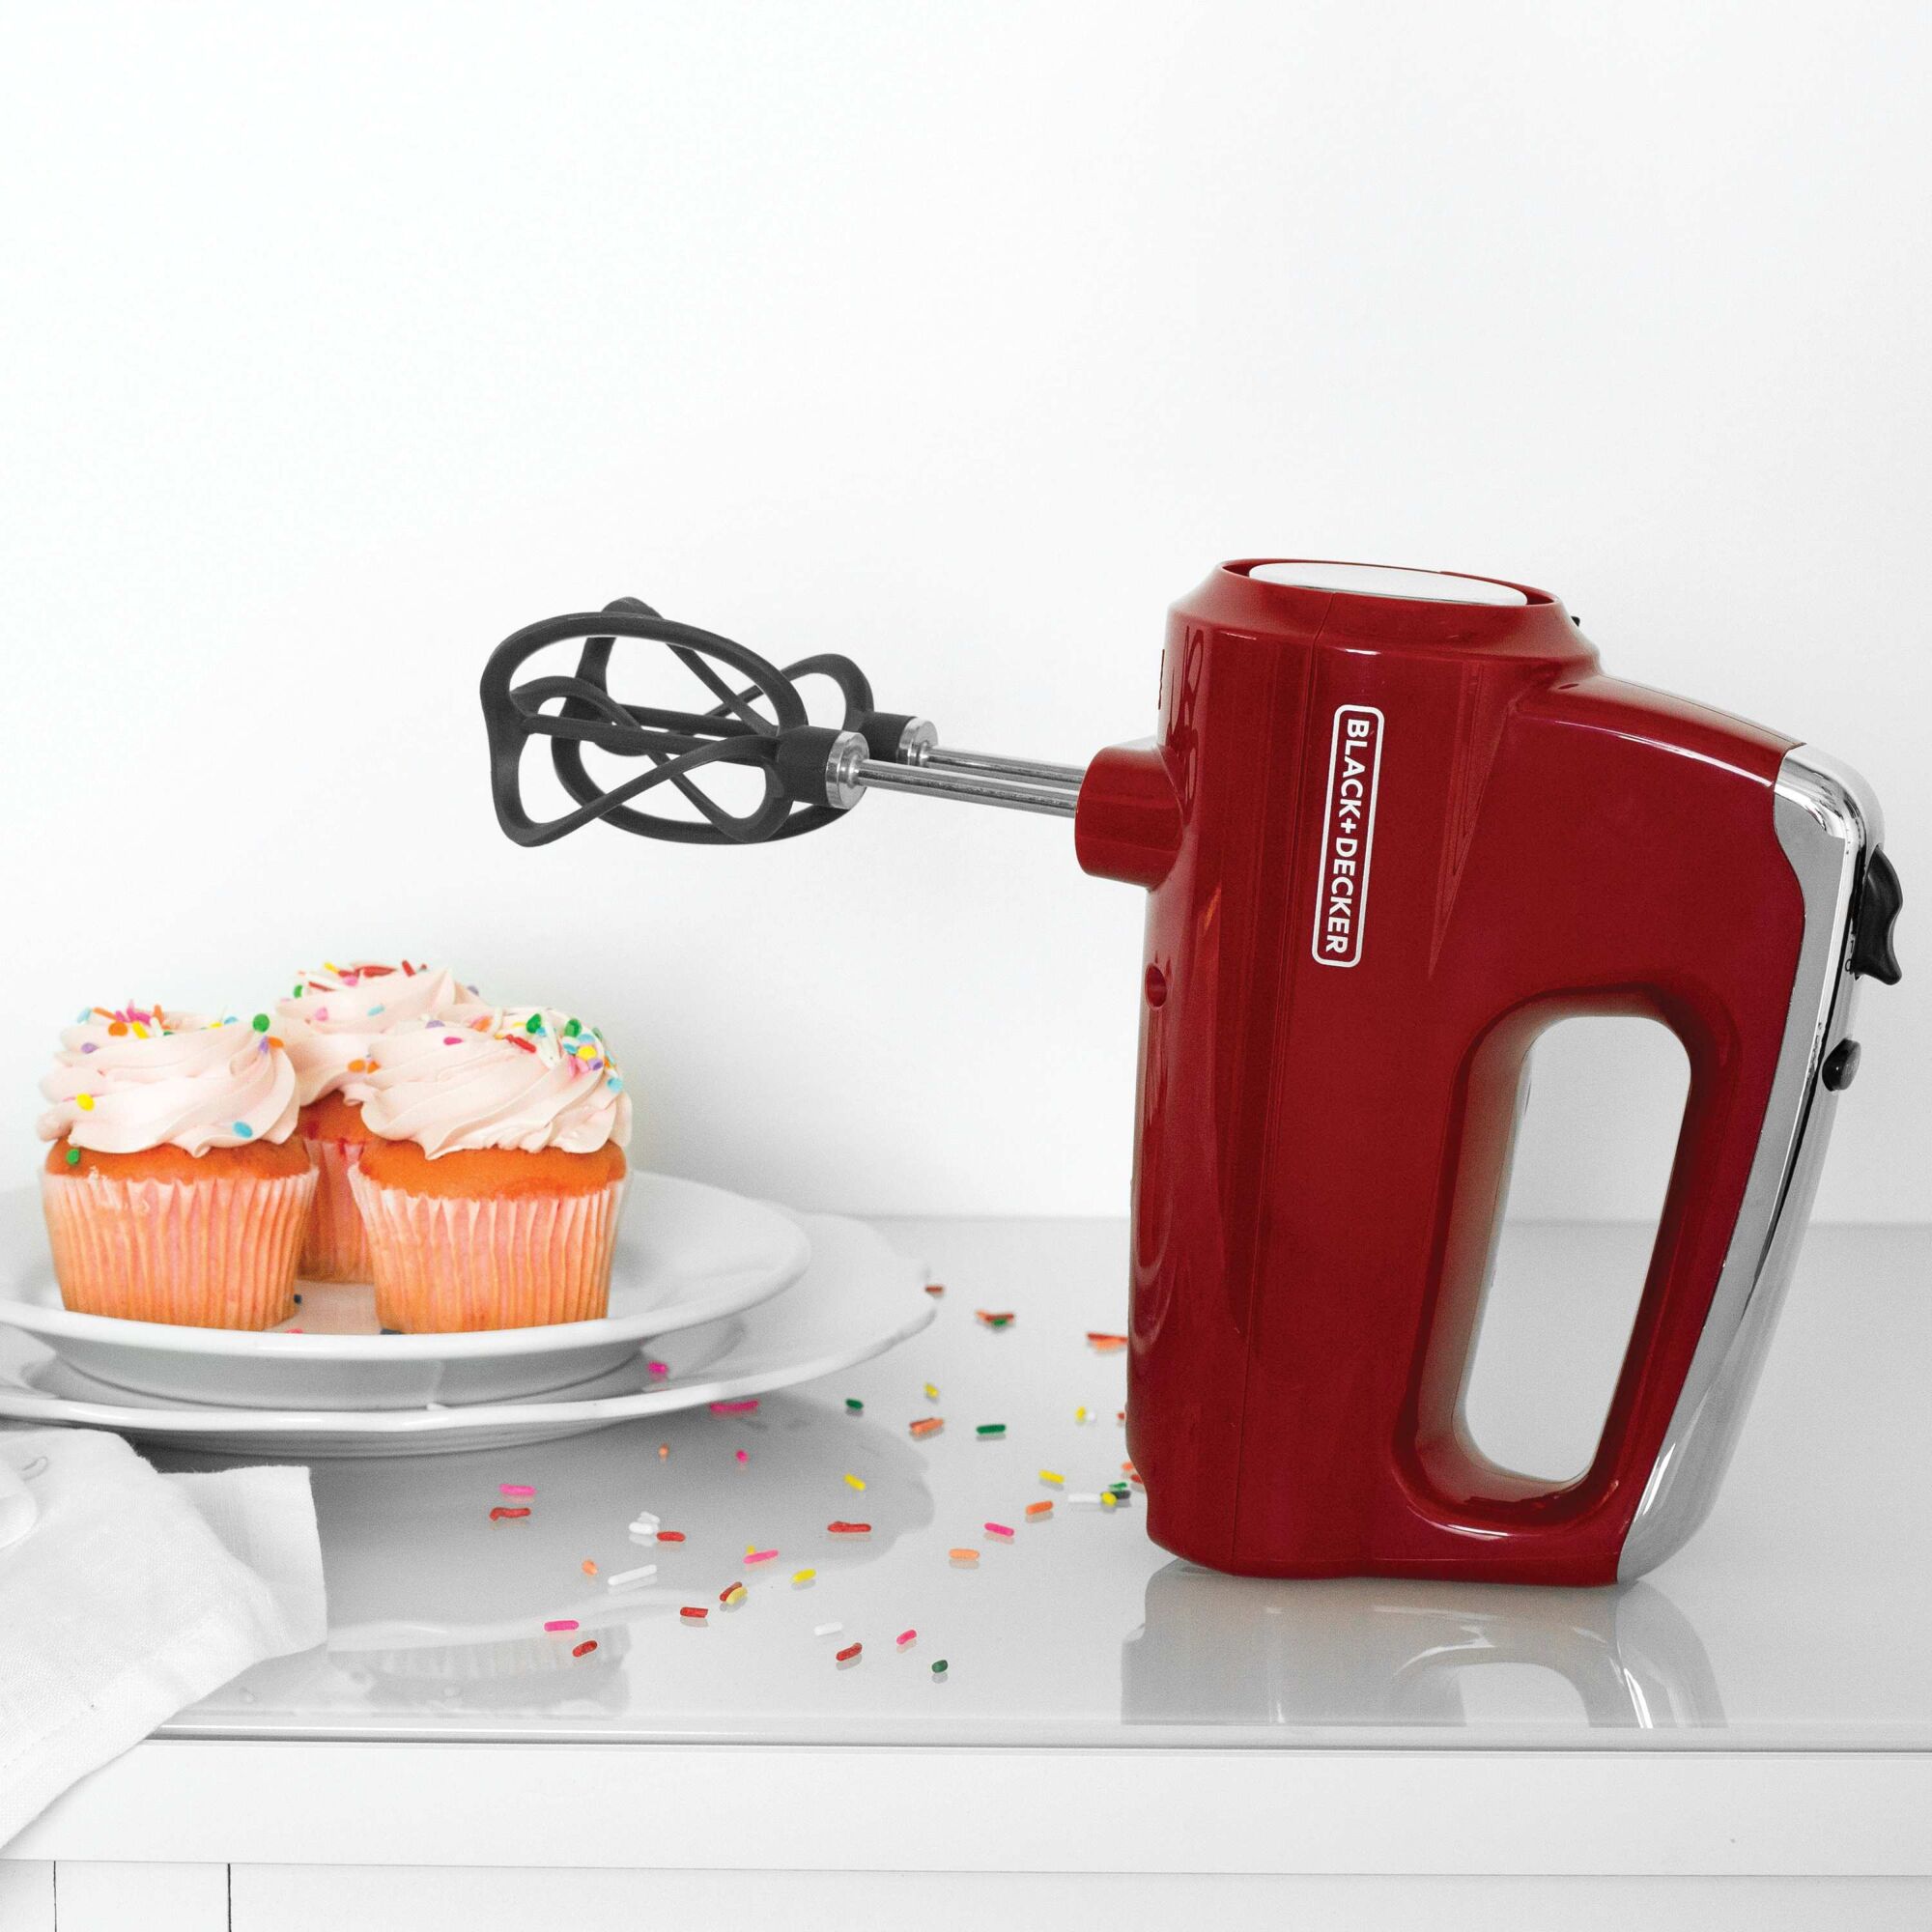 Helix performance premium 5 speed hand mixer with ready to eat frosted cupcakes on kitchen counter.